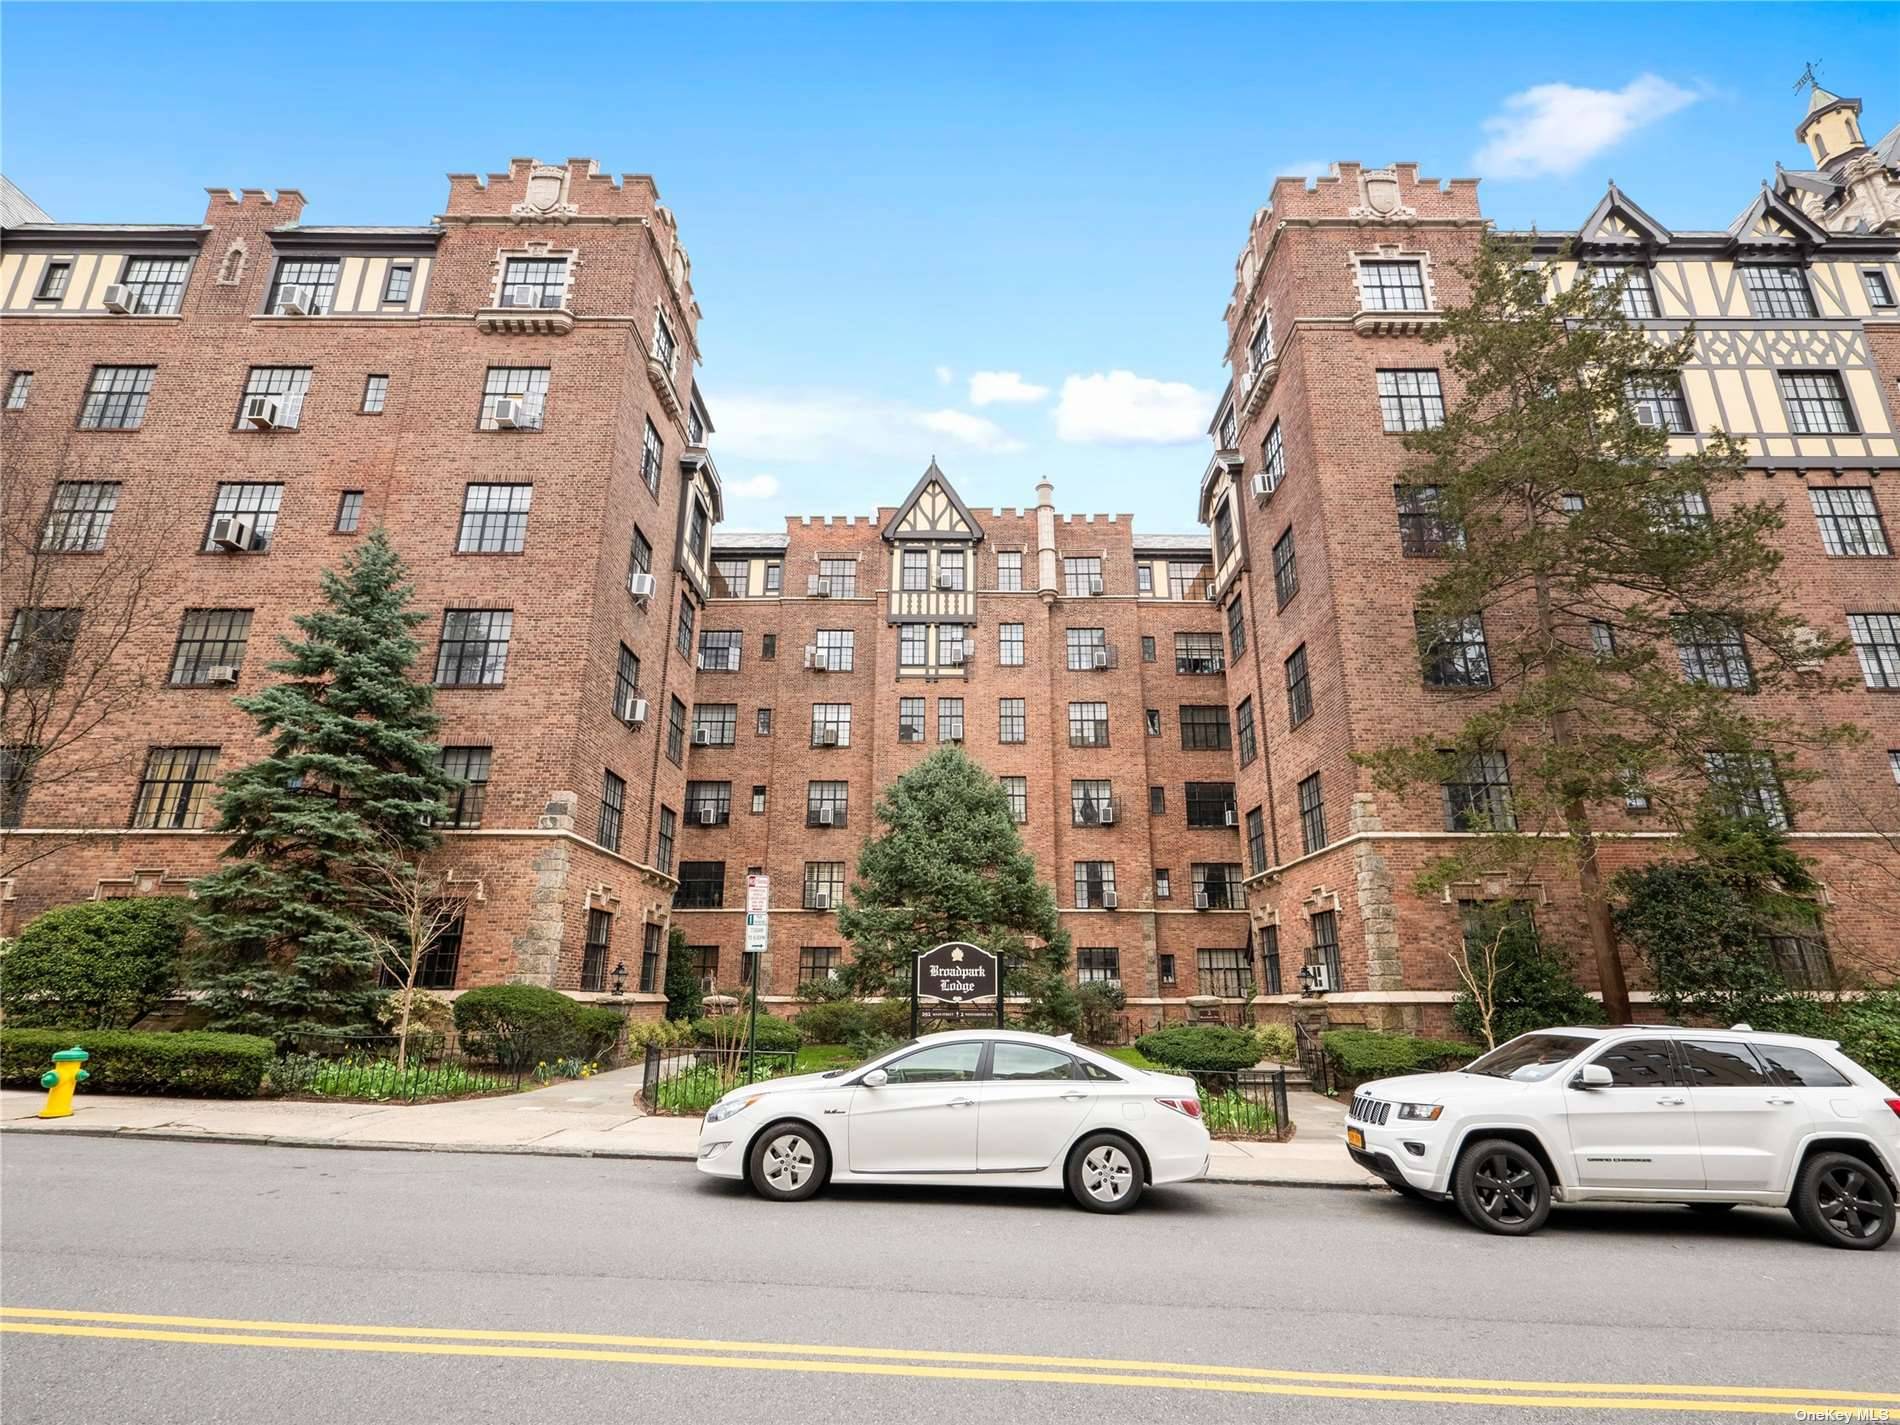 Laid back luxury in the perfect residence is this beautiful one bedroom, one bathroom in Broadpark Lodge, located at the intersection of Westchester Avenue and Main Street.